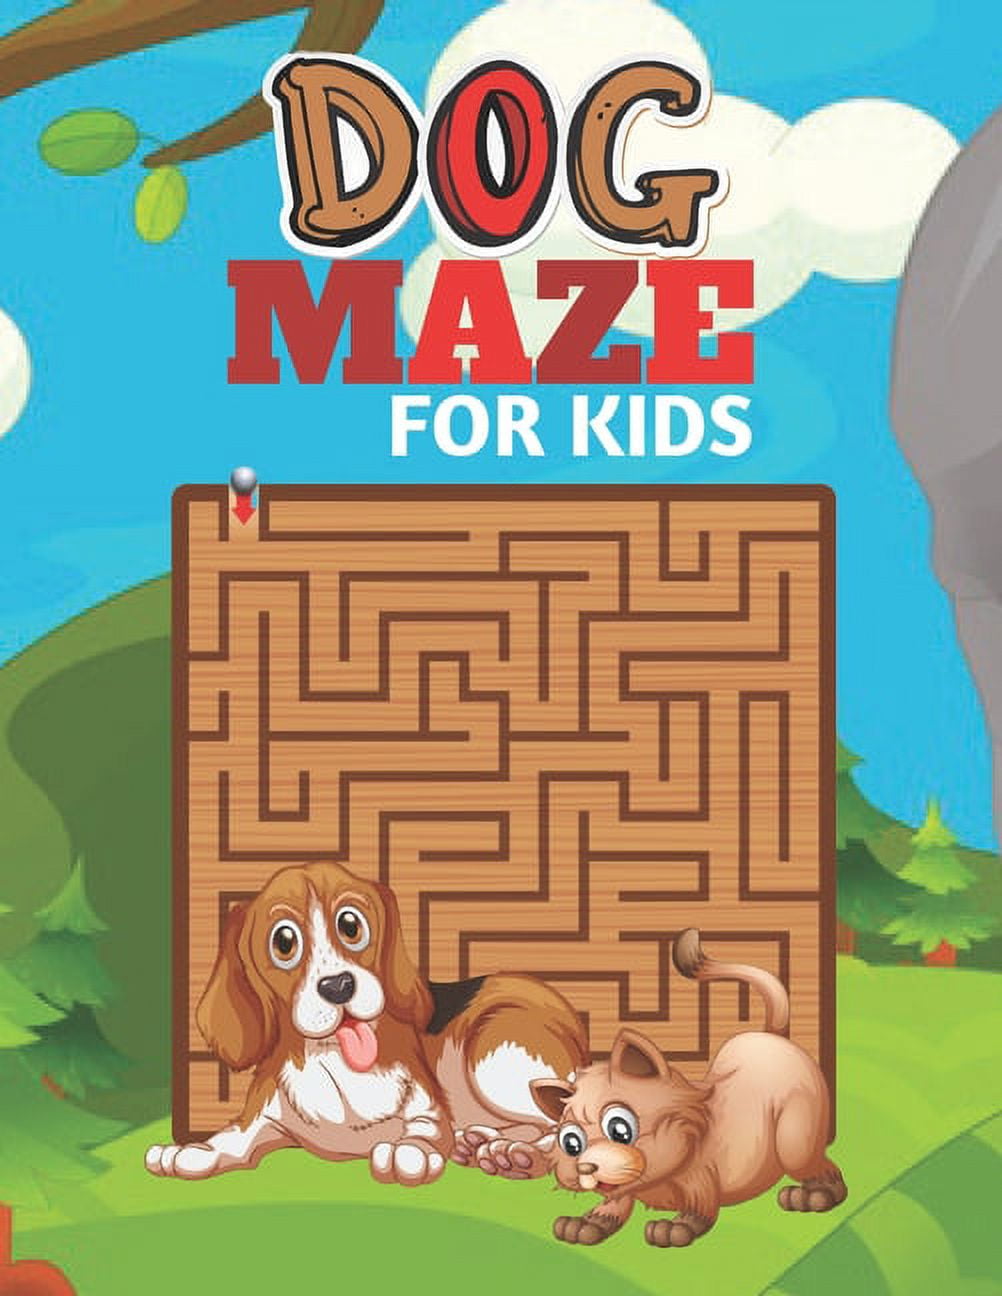 Dog Maze for Kids: A challenging Dog and fun maze for kids by solving mazes  (Paperback) 